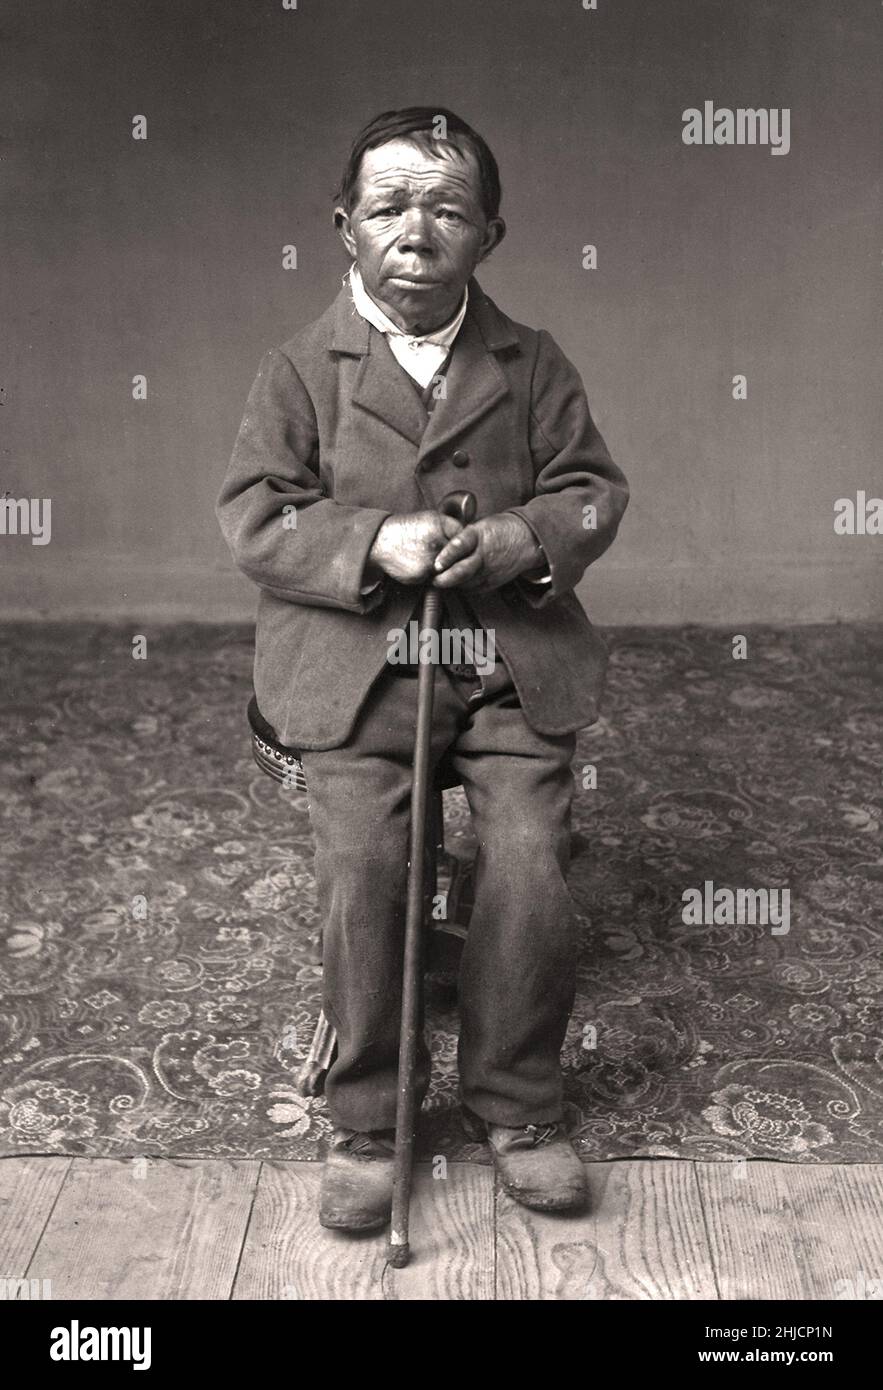 Portrait by Eugène Trutat (1840–1910) of a man with congenital iodine deficiency syndrome. The photograph is titled Joseph le crétin (Joseph the Cretin). Congenital iodine deficiency syndrome is a medical condition present at birth marked by impaired physical and mental development, due to insufficient thyroid hormone (hypothyroidism) often caused by insufficient dietary iodine during pregnancy. It is one cause of underactive thyroid function at birth, called congenital hypothyroidism, and also referred to as cretinism. If untreated, it results in impairment of both physical and mental develop Stock Photo